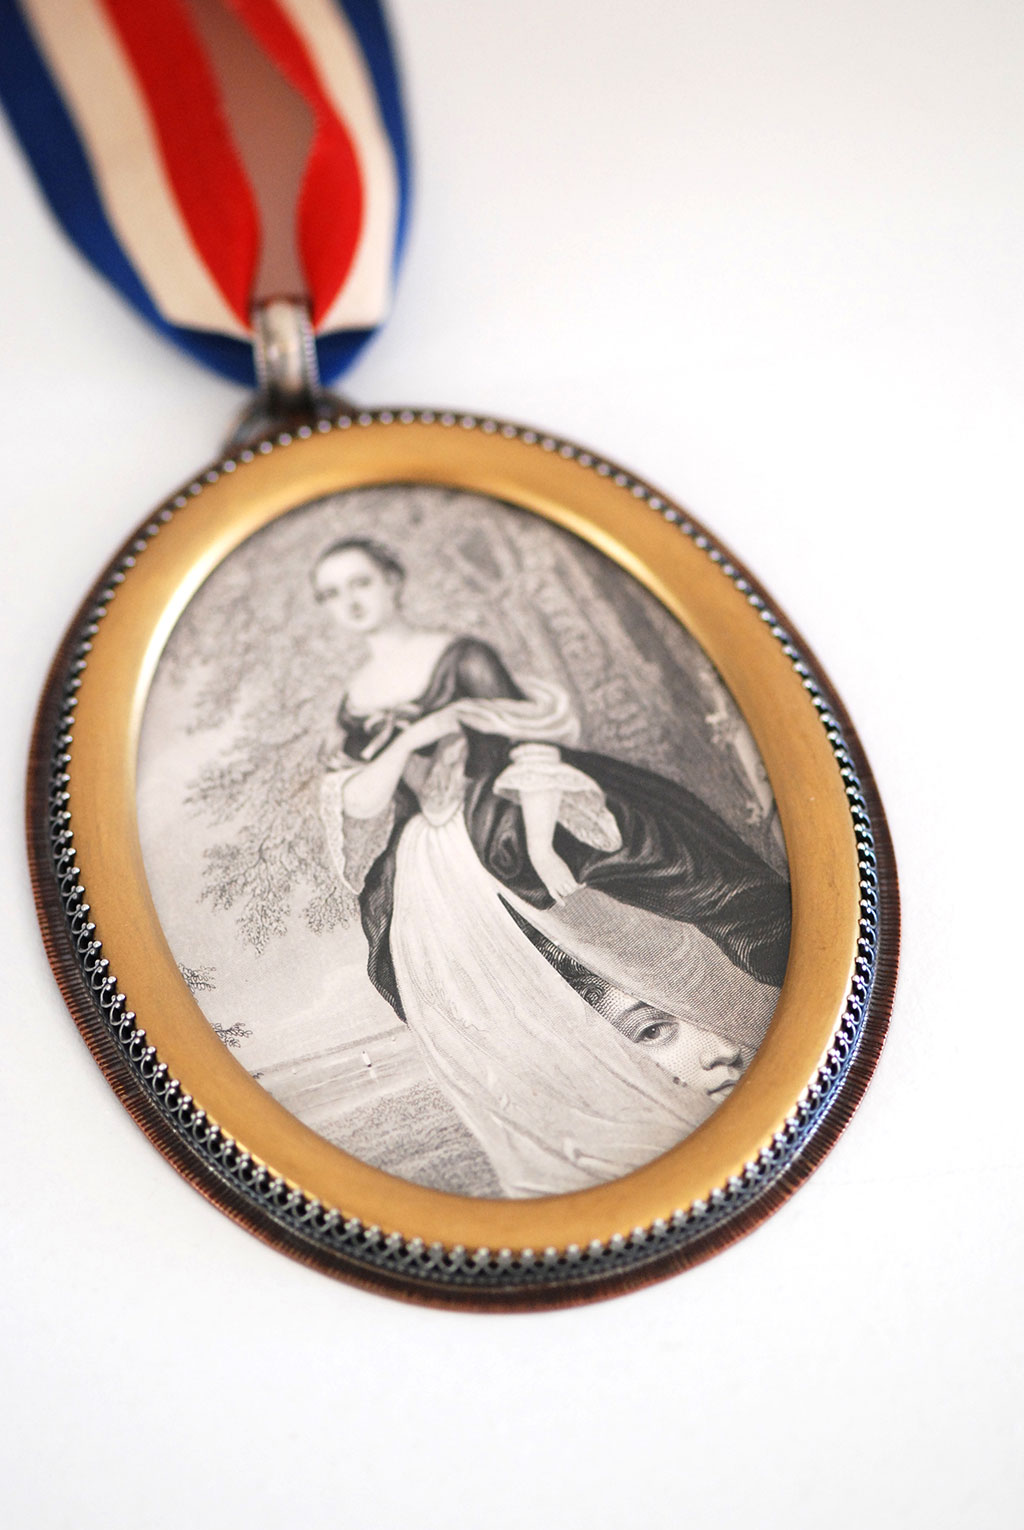 Roberta and Dave Williamson, Secrets…The First First Lady Pendant, 2016